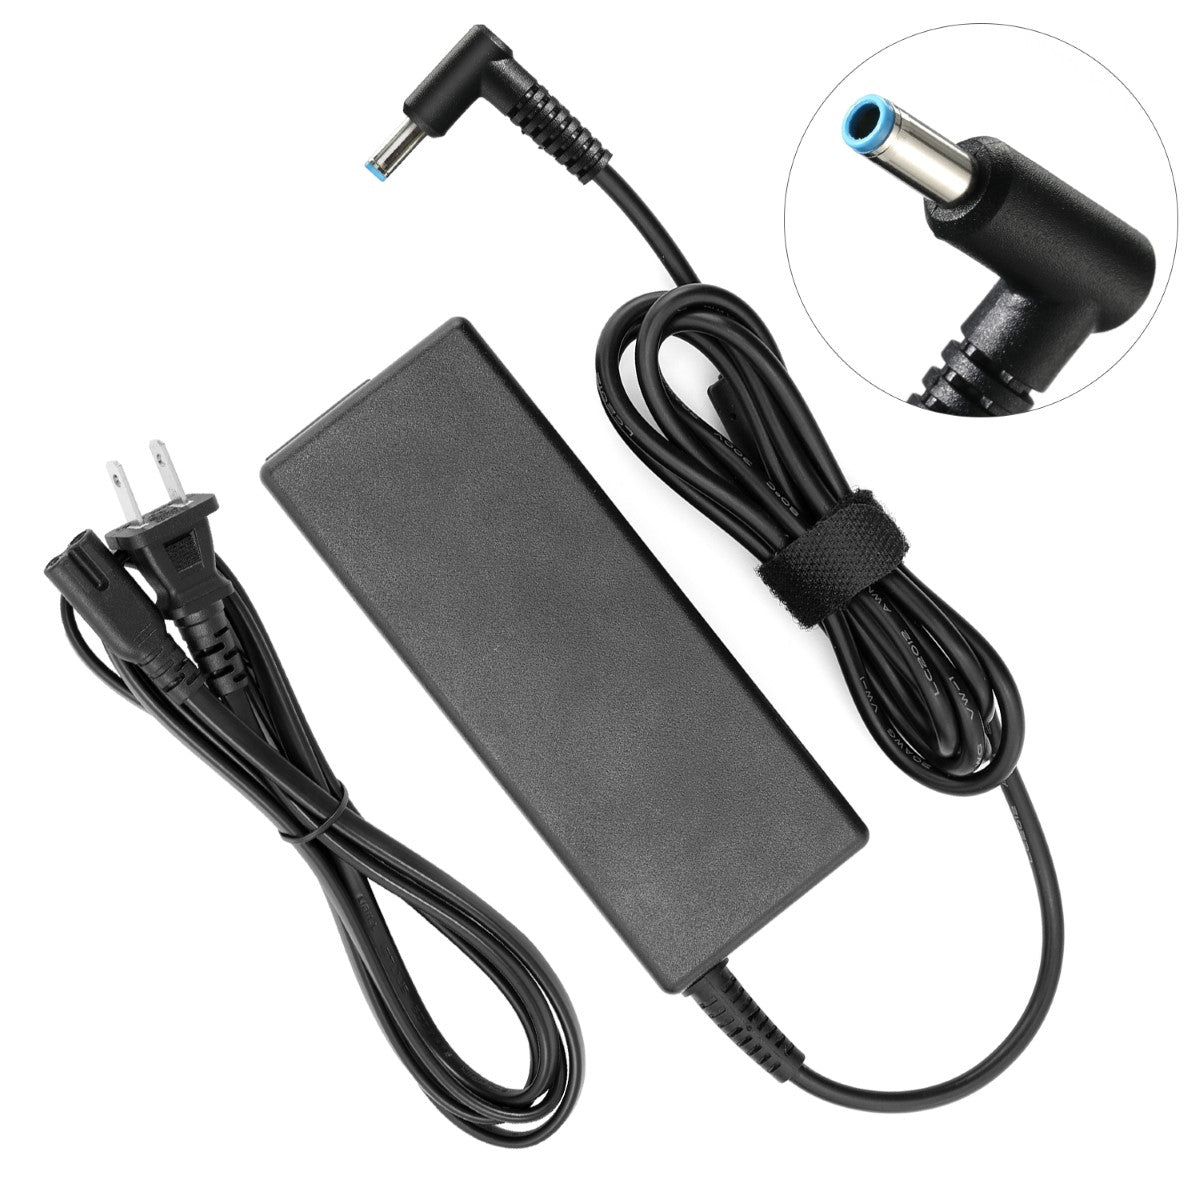 AC Adapter Charger for HP Envy TouchSmart 17-j020us Notebook.